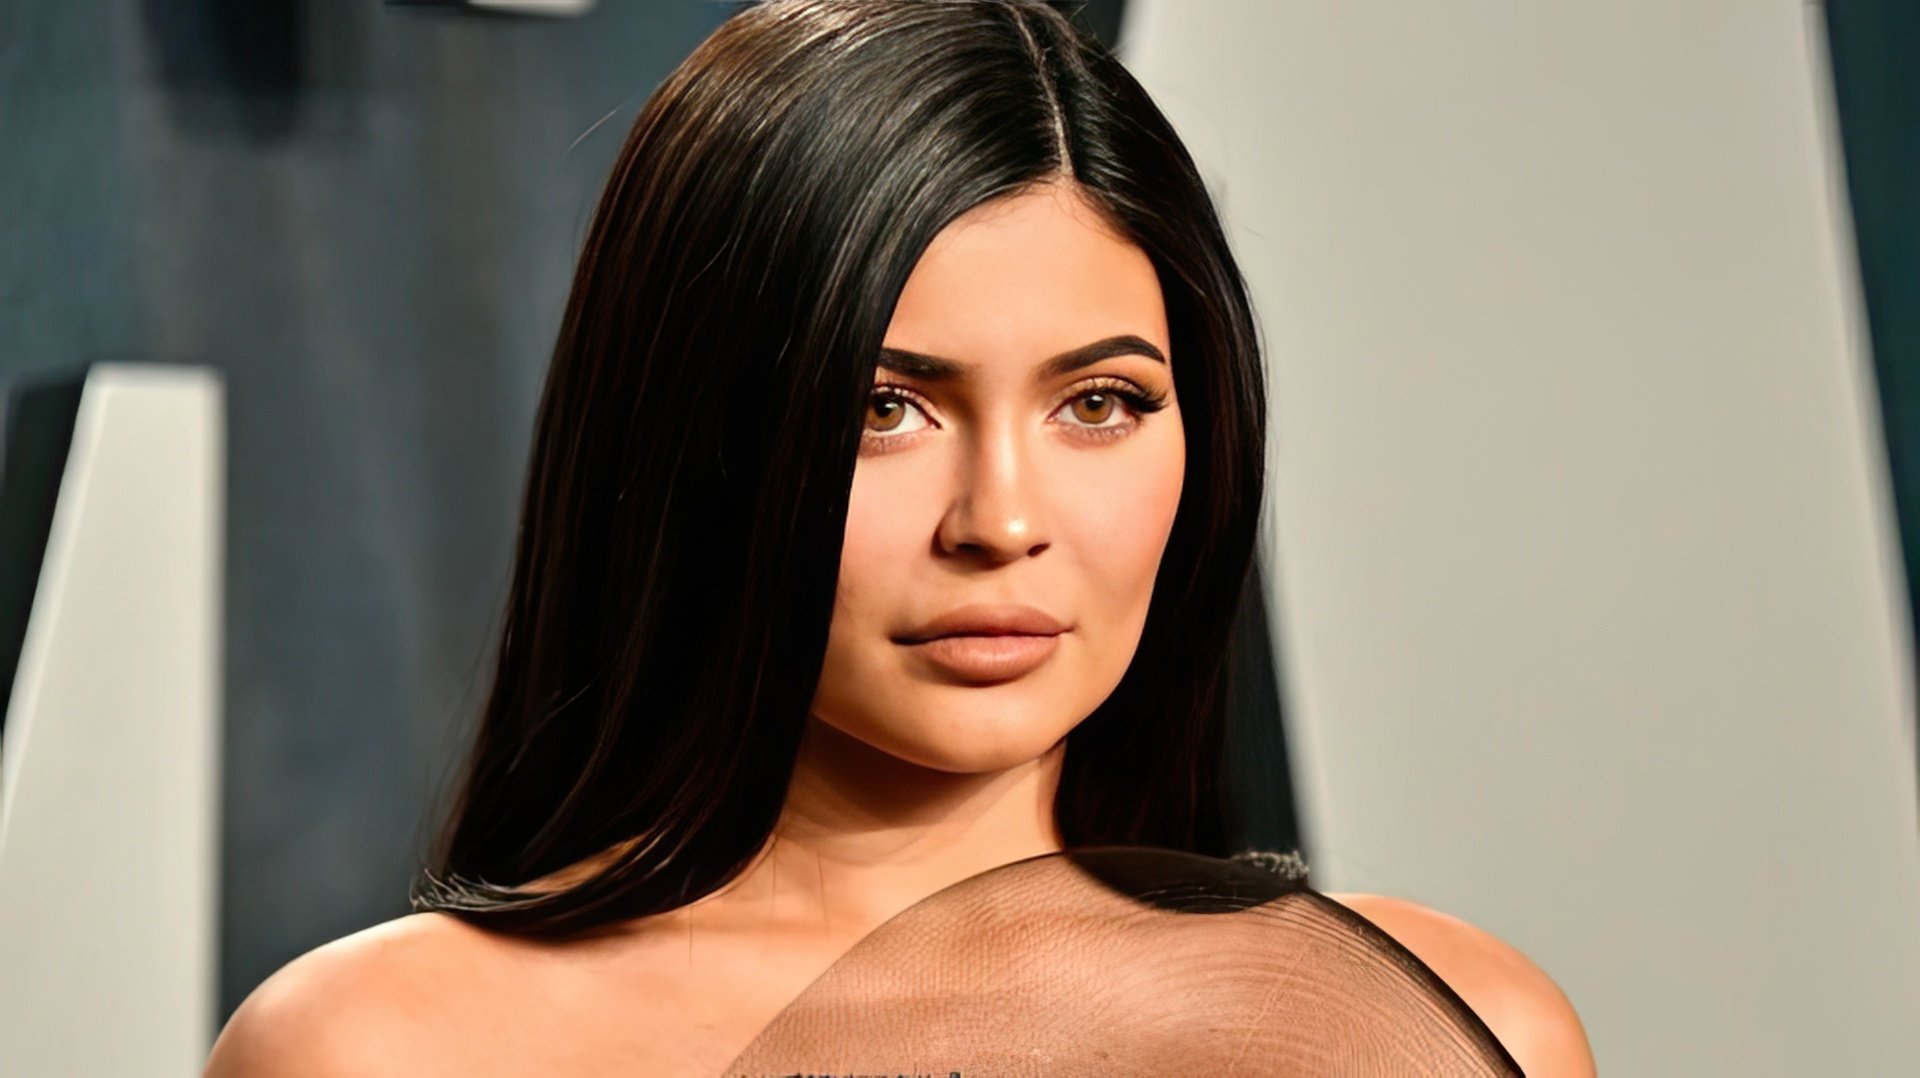 Kylie Jenner in 2020